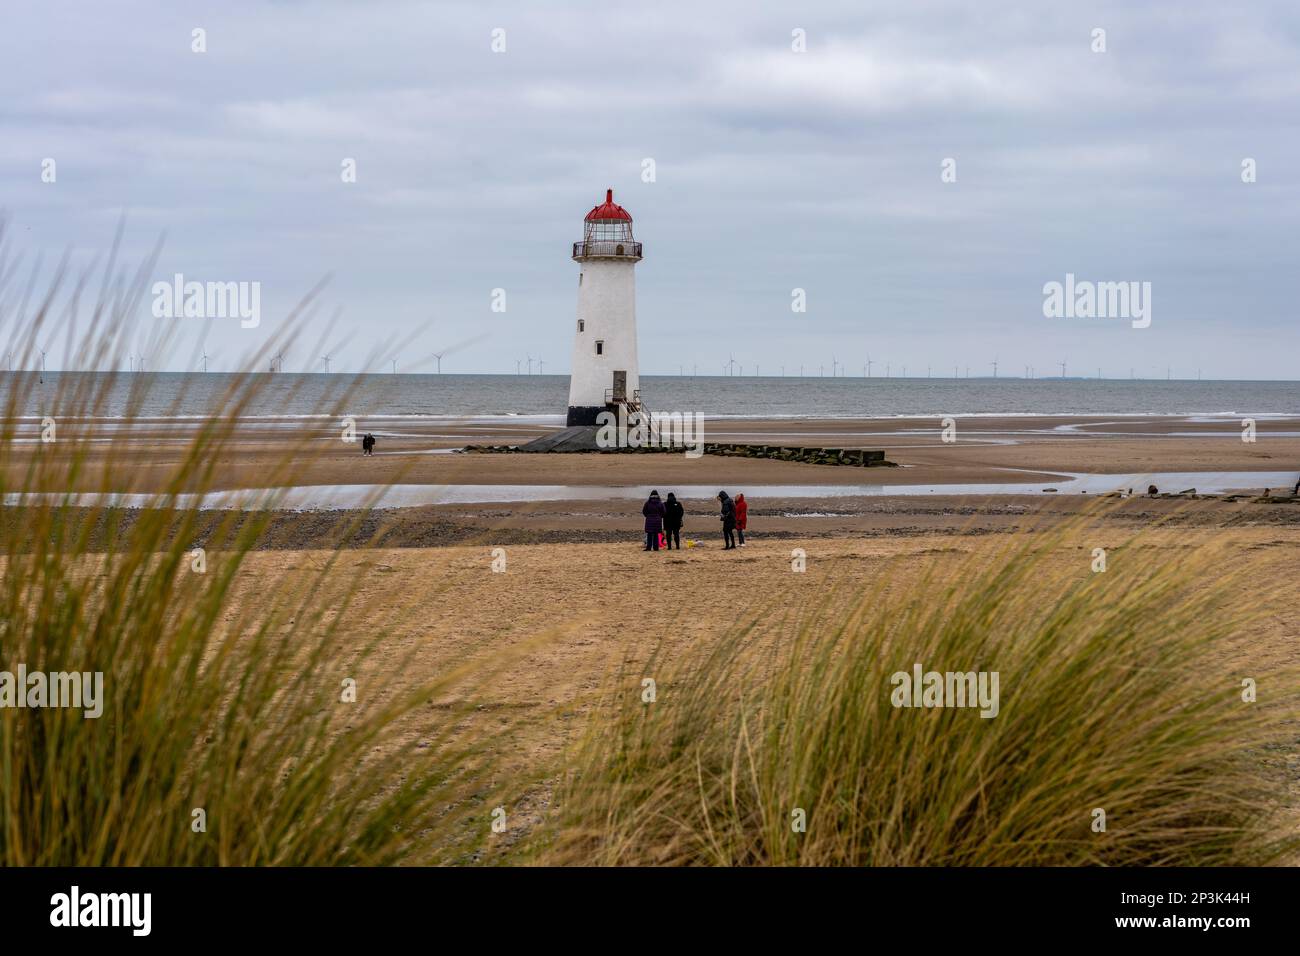 Talacre beach Point of Ayr light house peaking out above sand dunes and grasses. Stock Photo